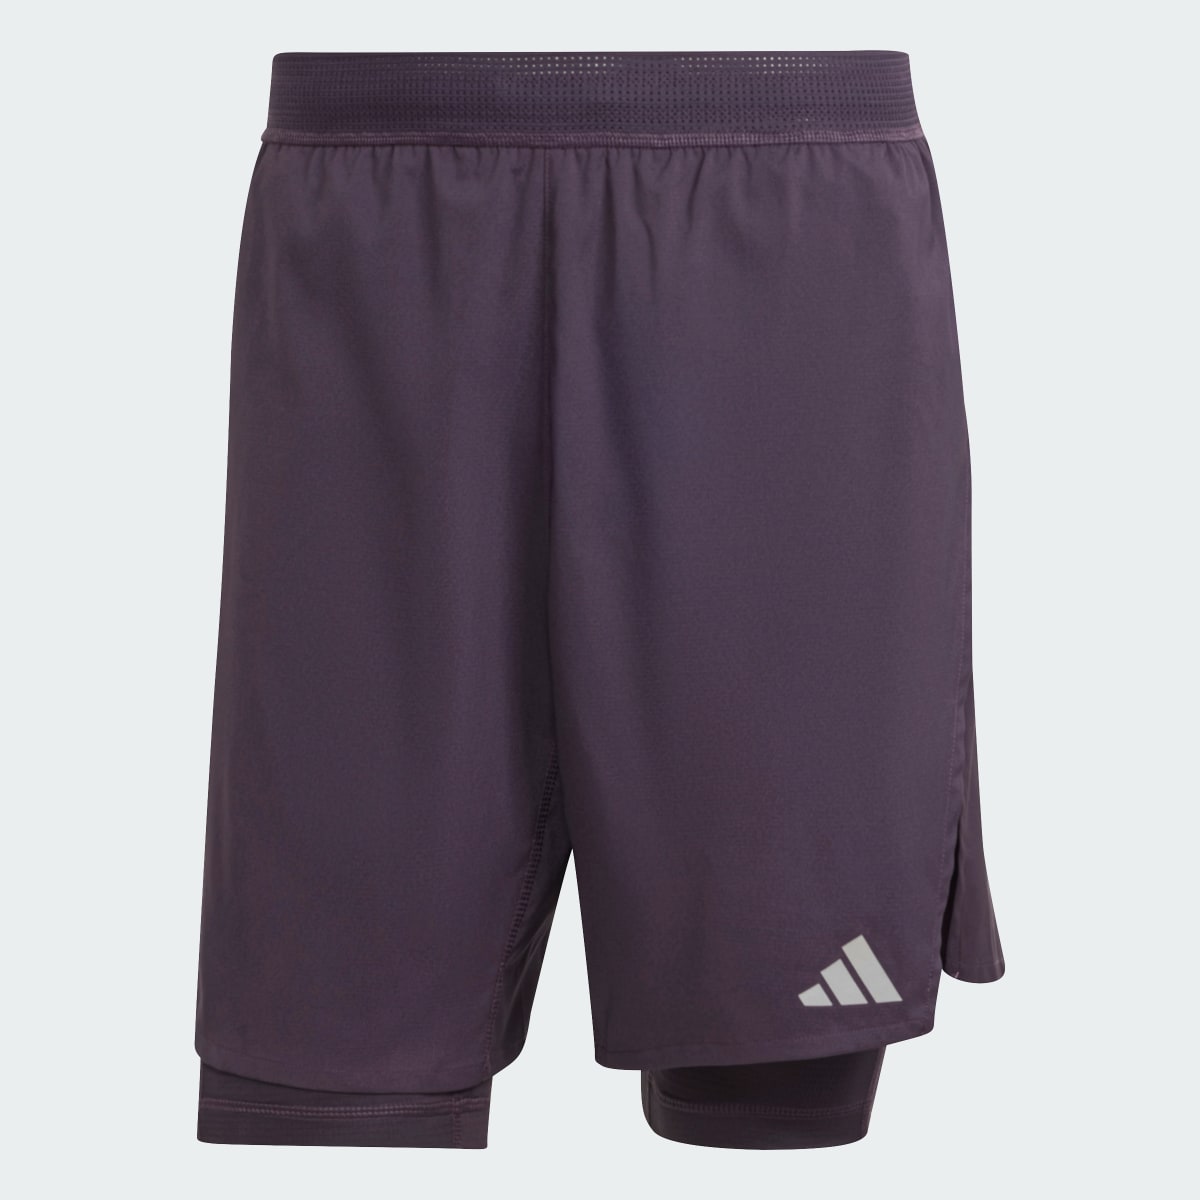 Adidas HIIT Workout HEAT.RDY 2-in-1 Shorts. 4